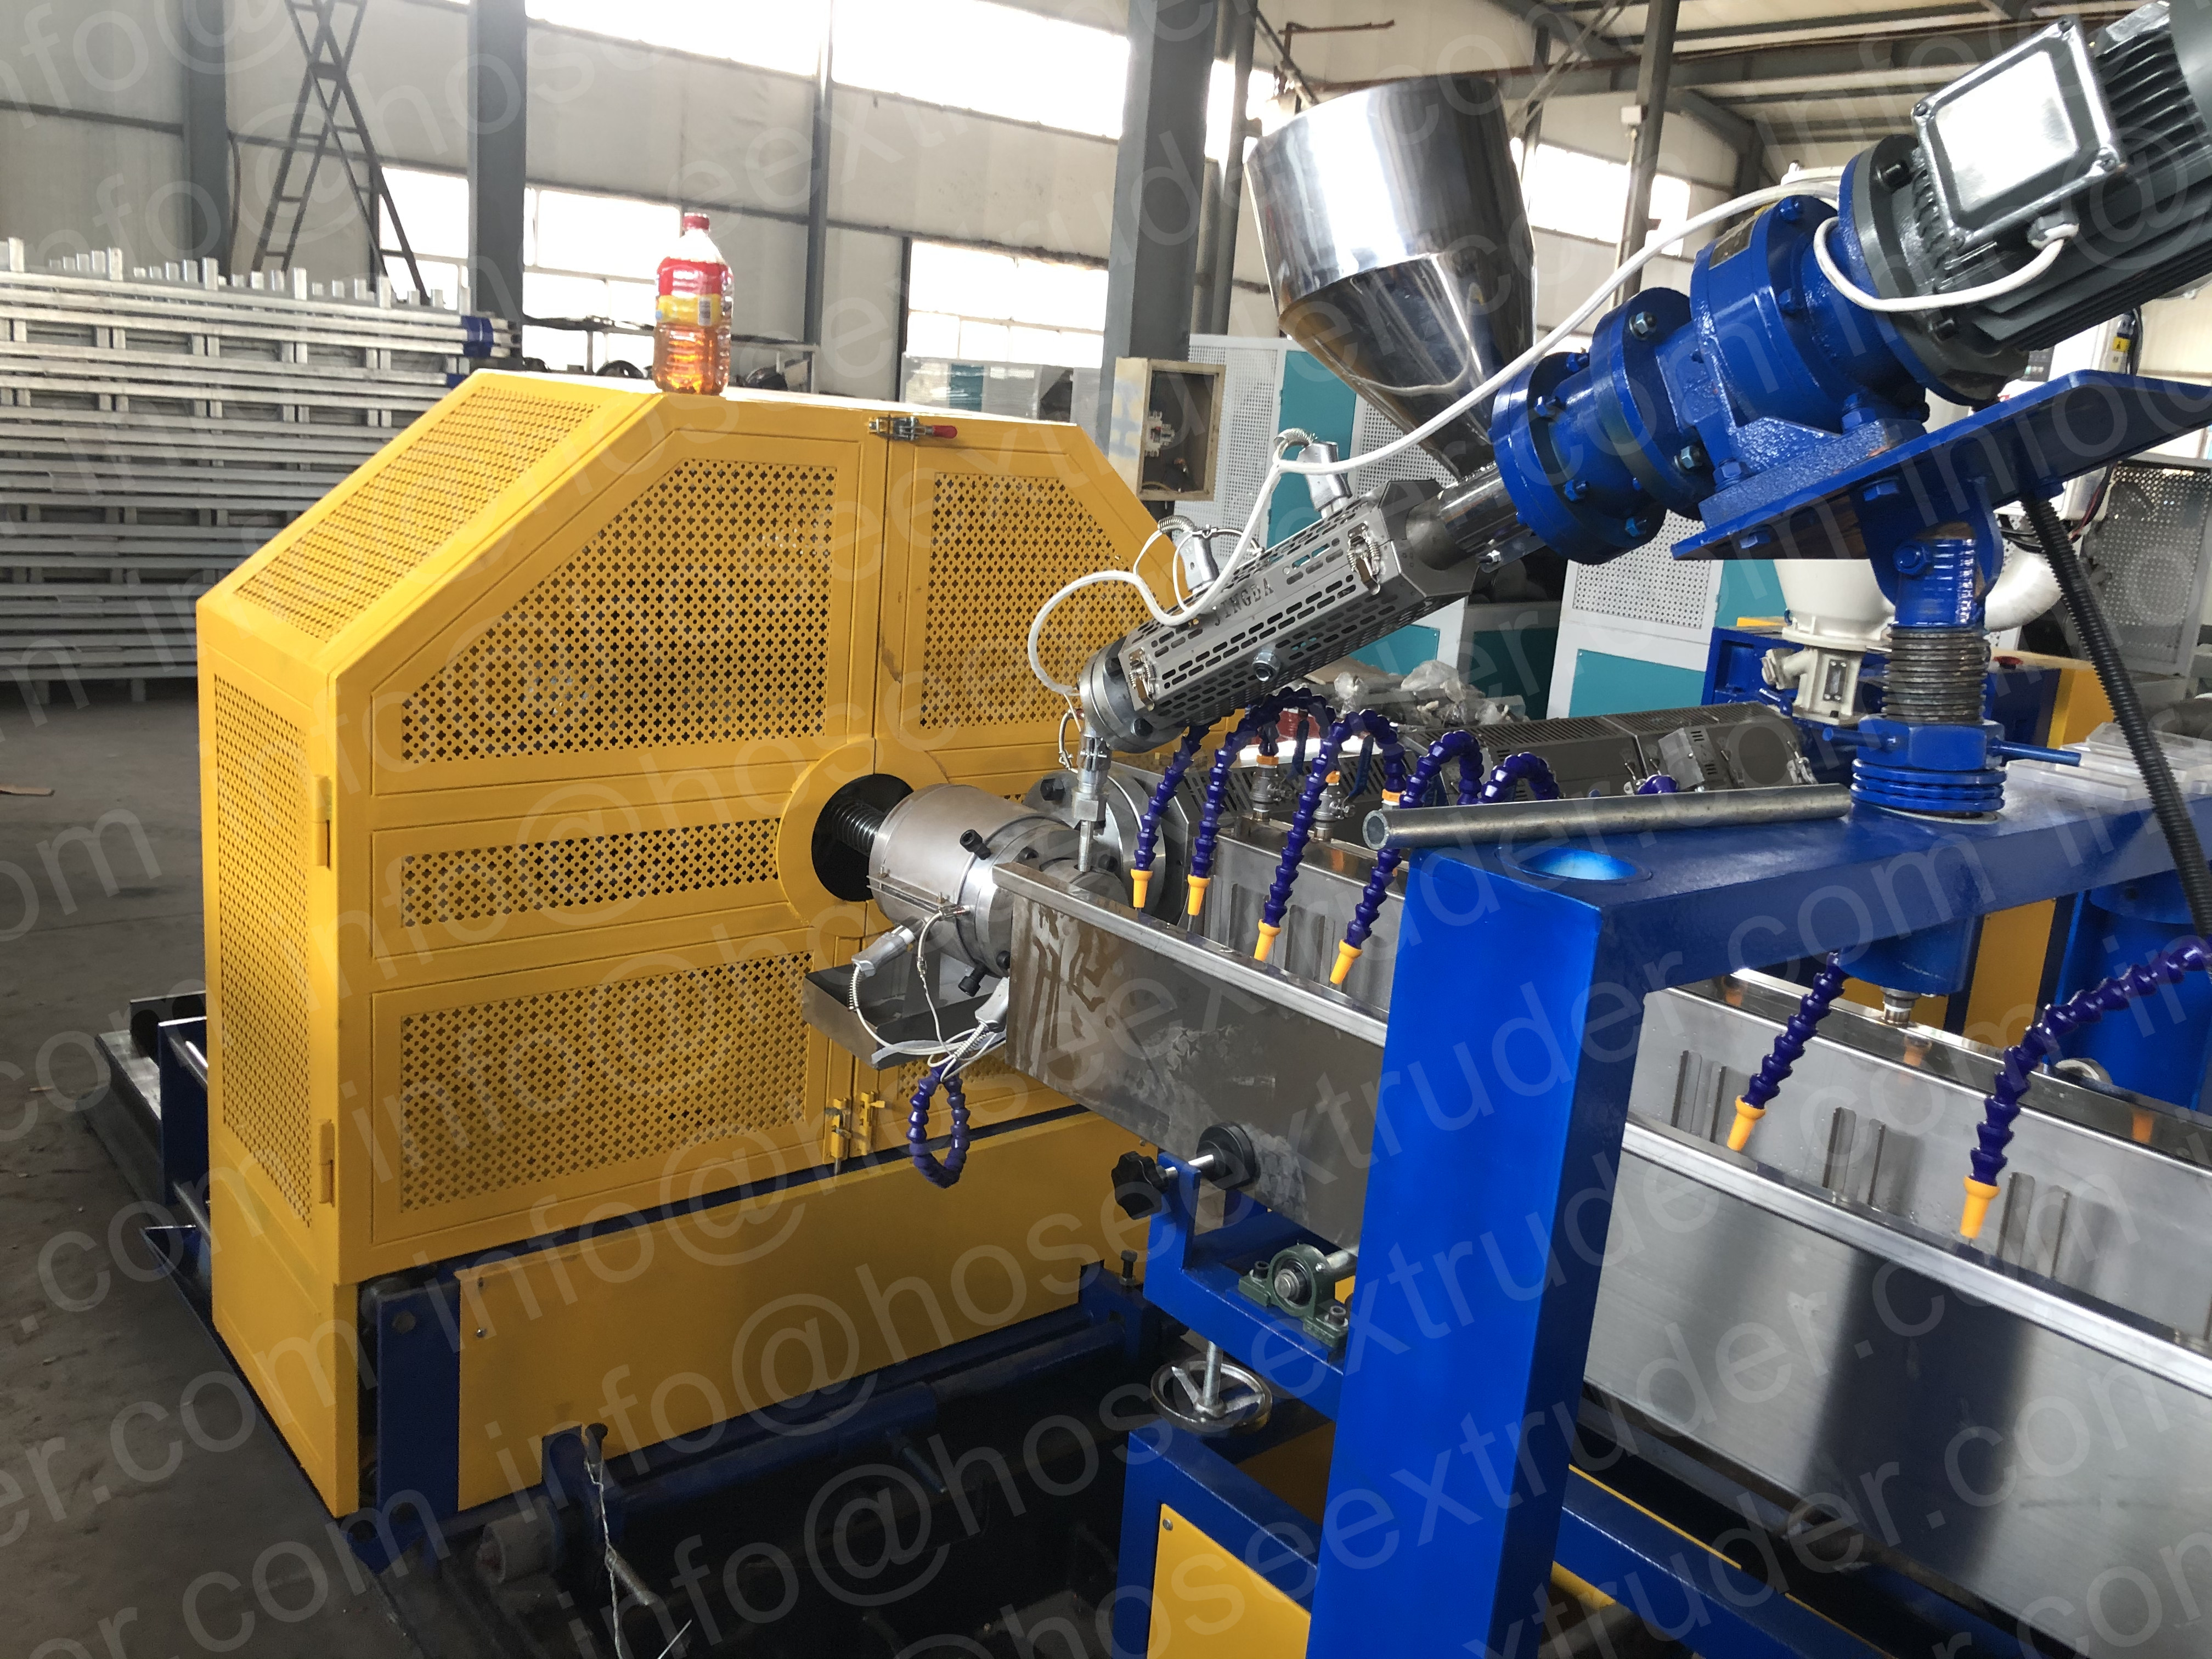 Testing finished for Brazil client's steel wire reinforced PVC hose extruder machine